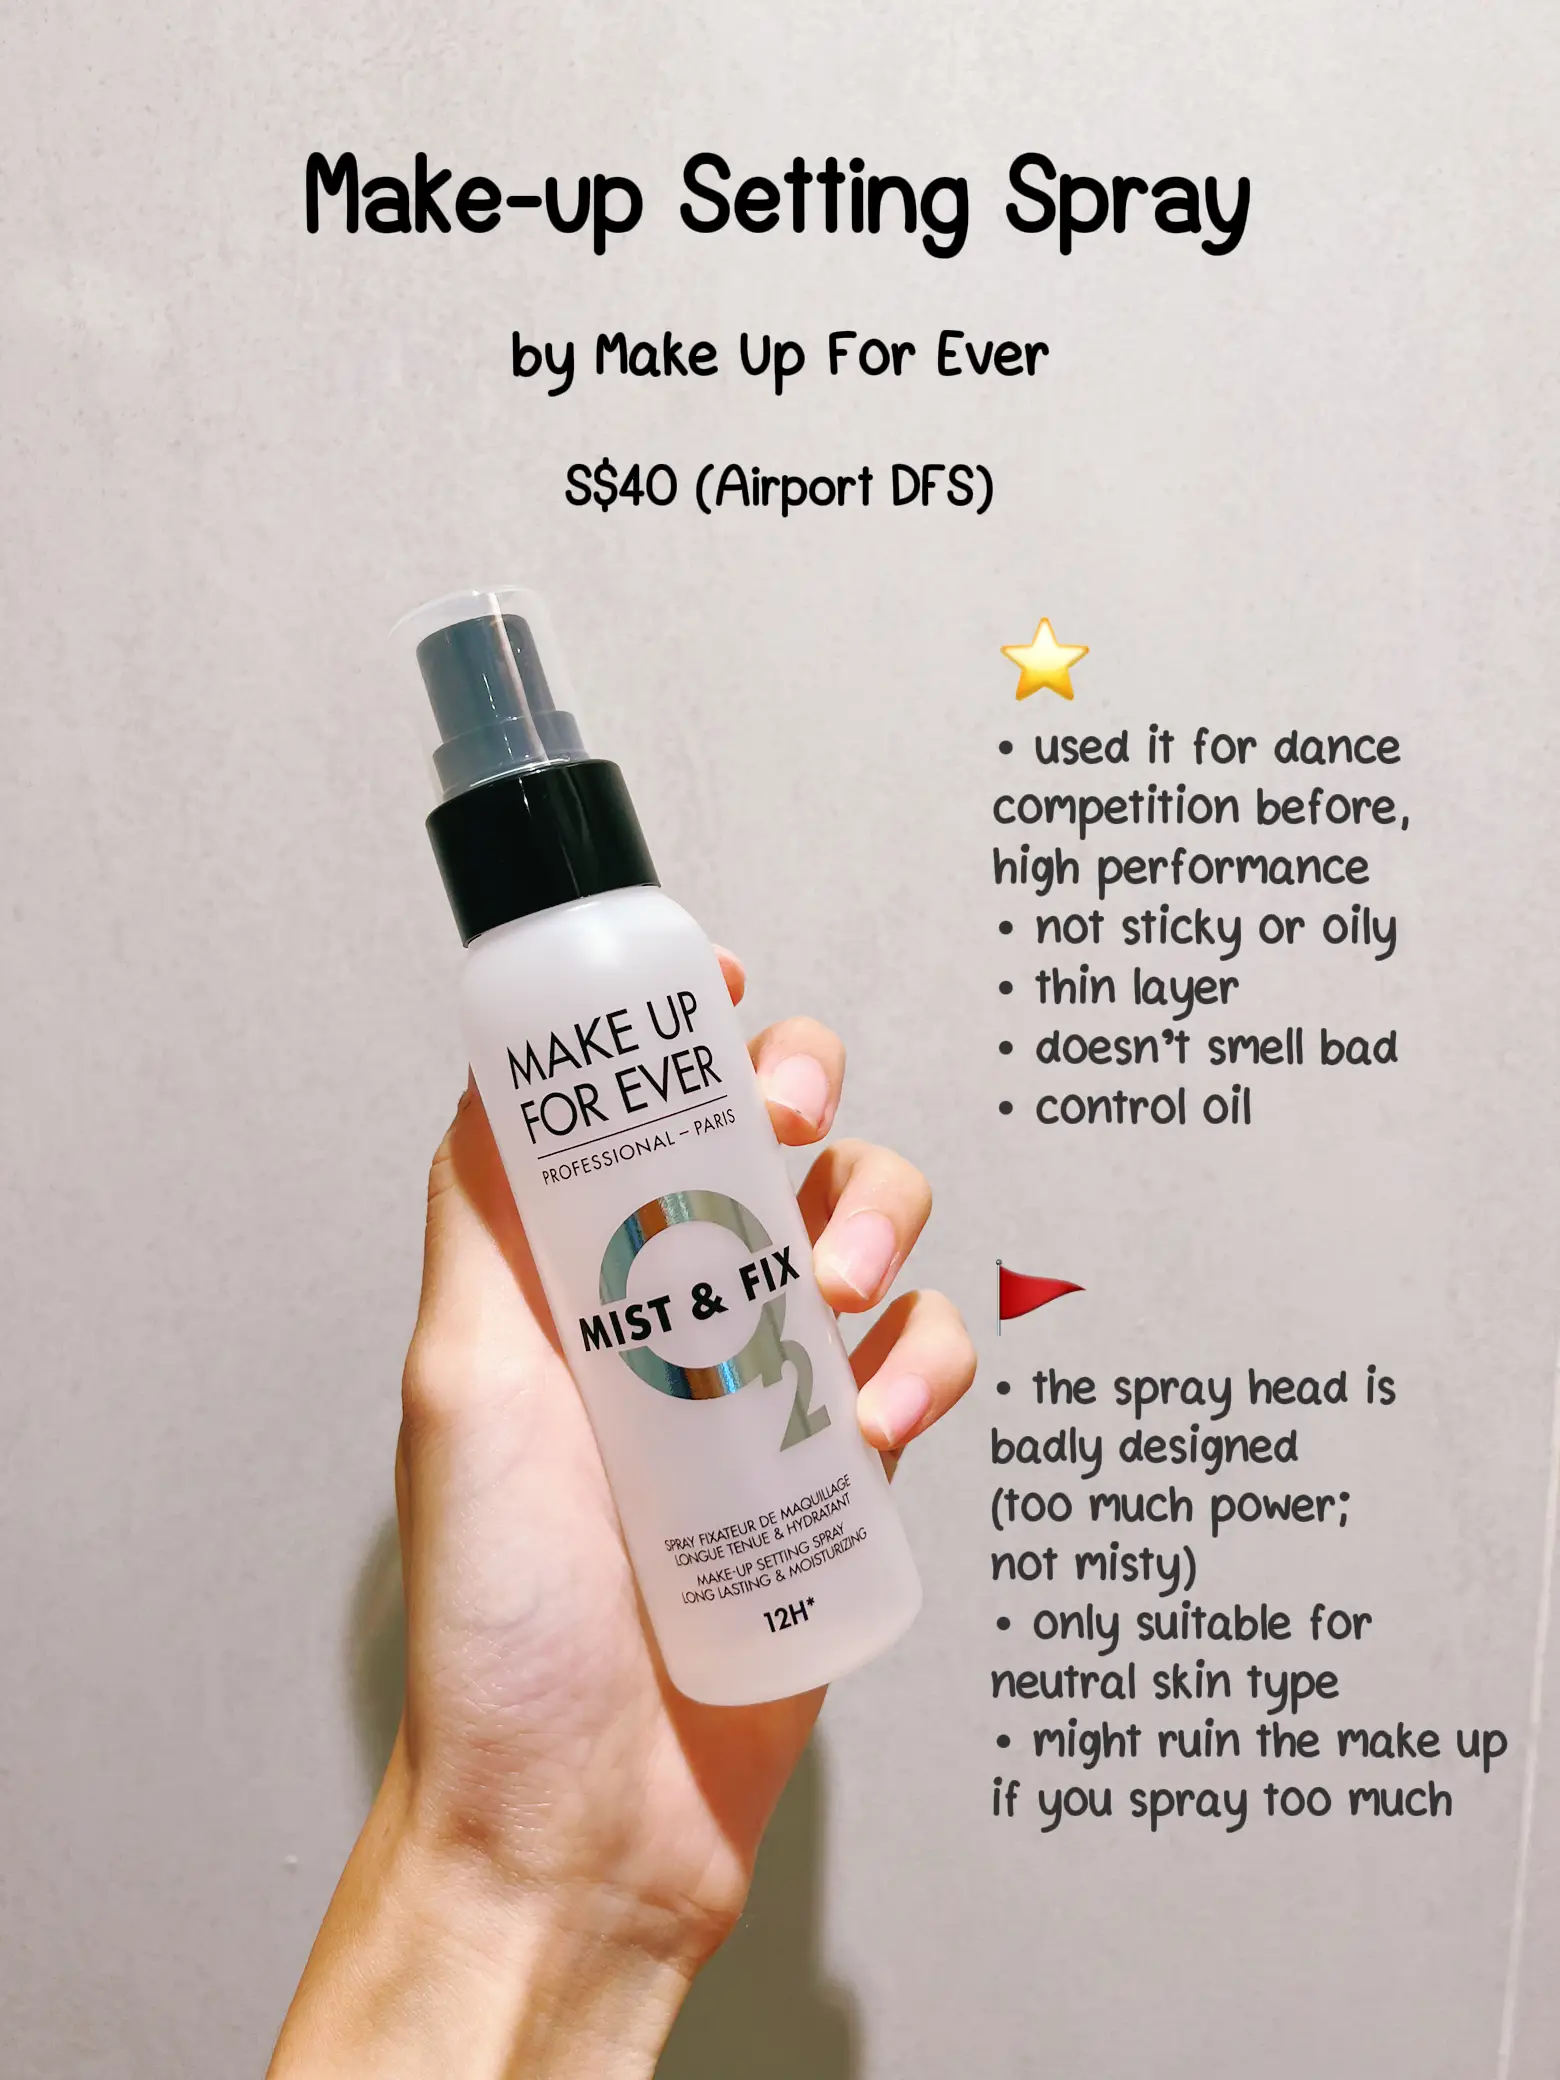 Honest review of popular+useful beauty products 🧐❤️ | Gallery posted by  ada | Lemon8